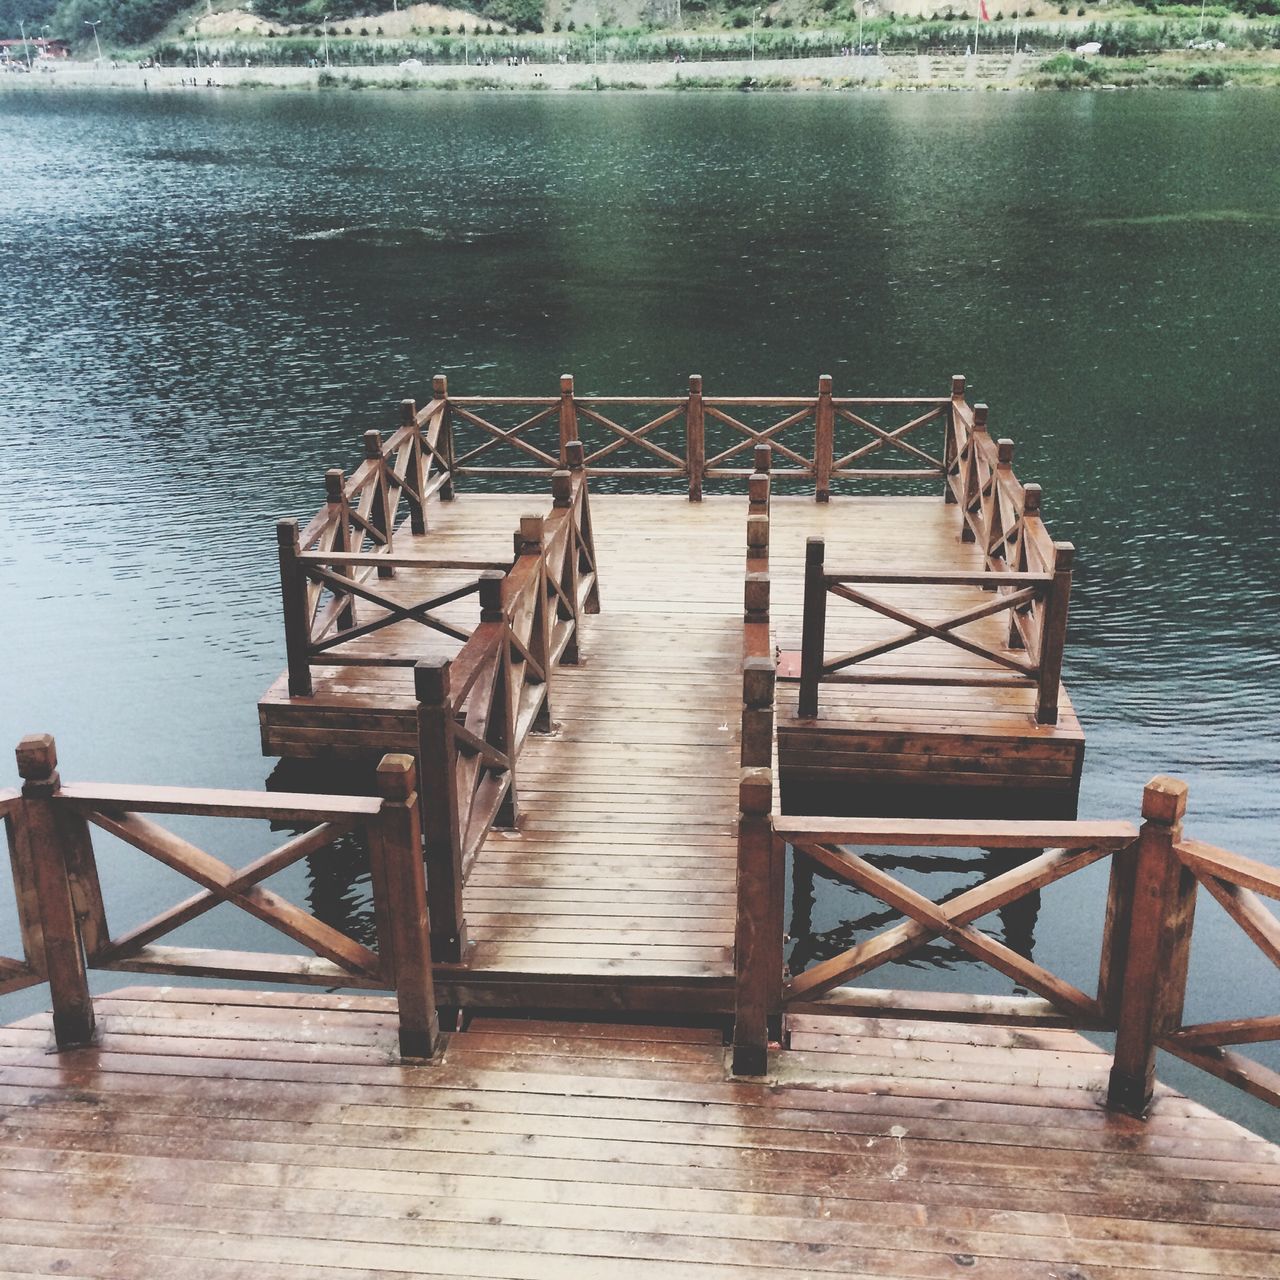 water, pier, wood - material, jetty, railing, lake, the way forward, sea, wooden, rippled, tranquility, wood, nature, tranquil scene, boardwalk, built structure, river, day, outdoors, high angle view